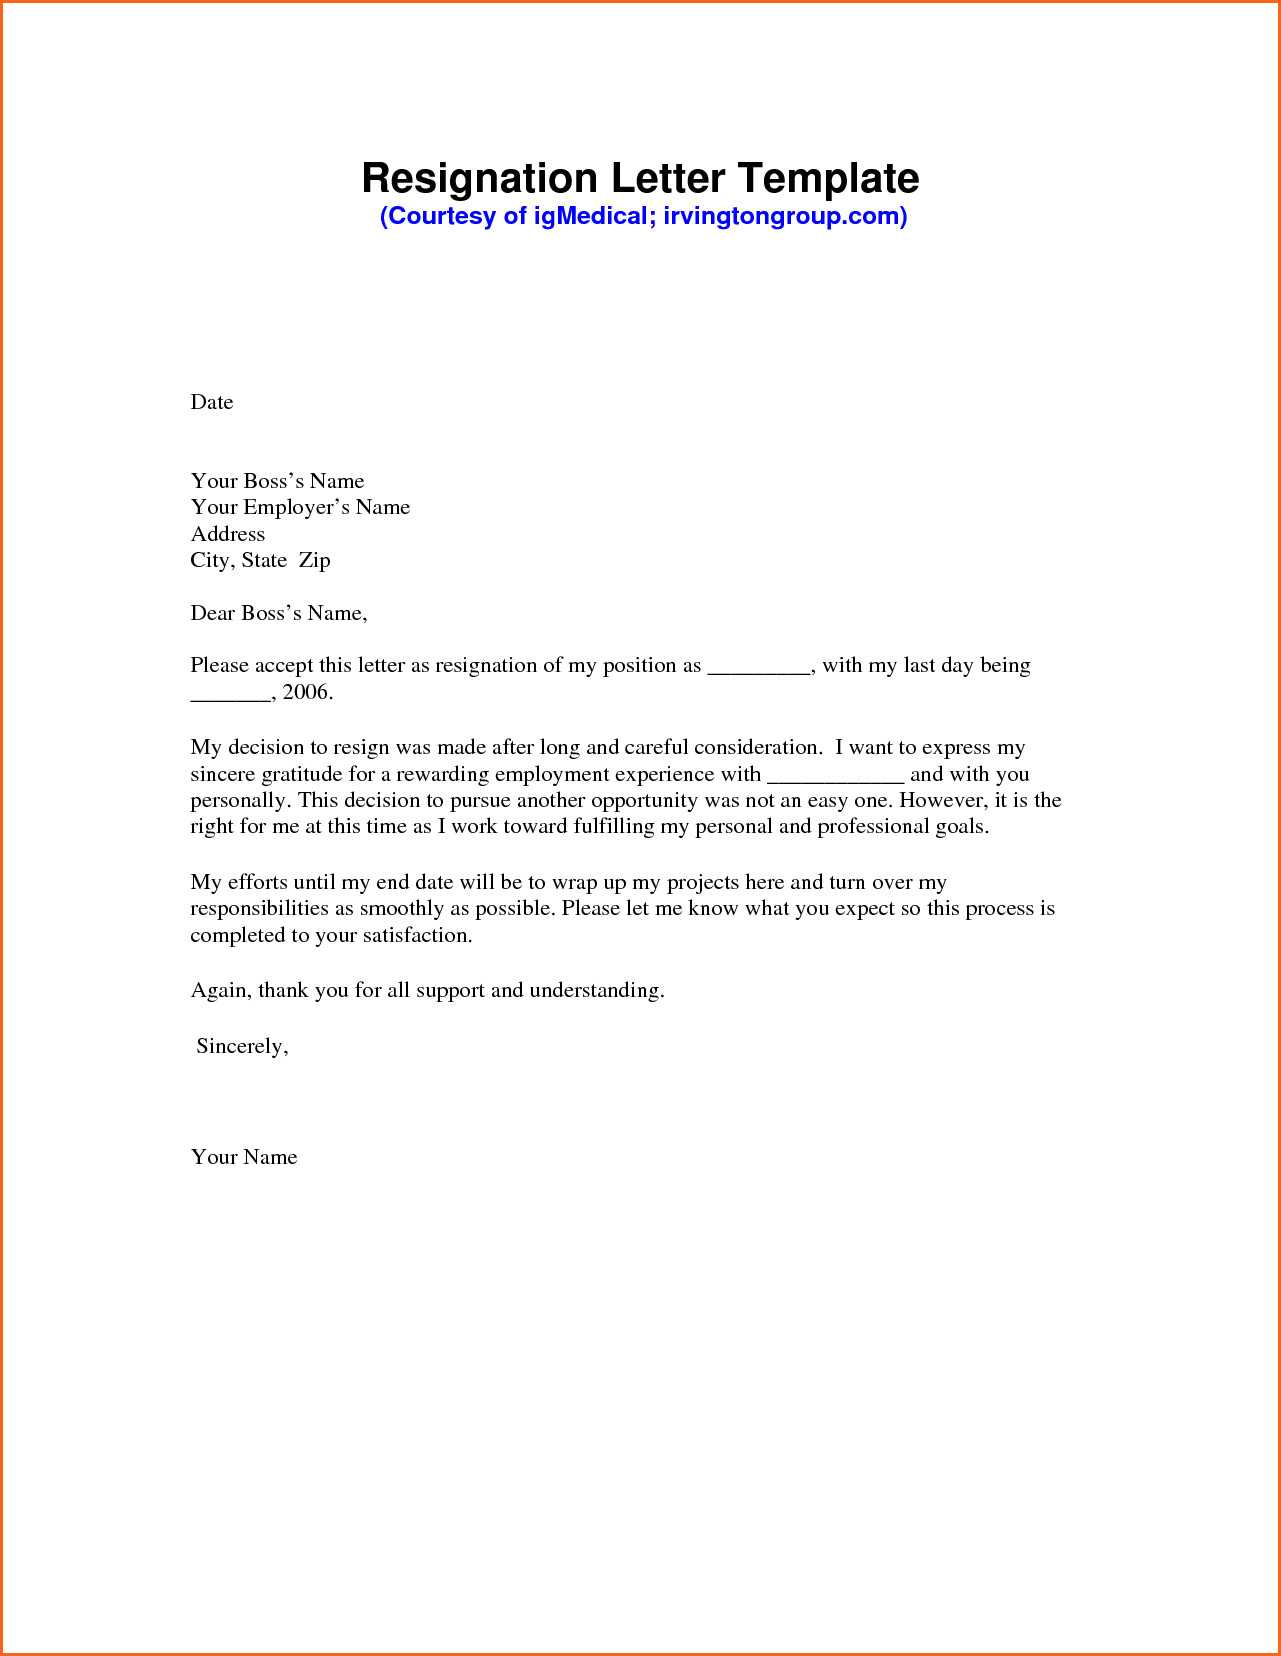 Download Resignation Letter Template Free Ideal Sample Throughout Free Sample Letter Of Resignation Template